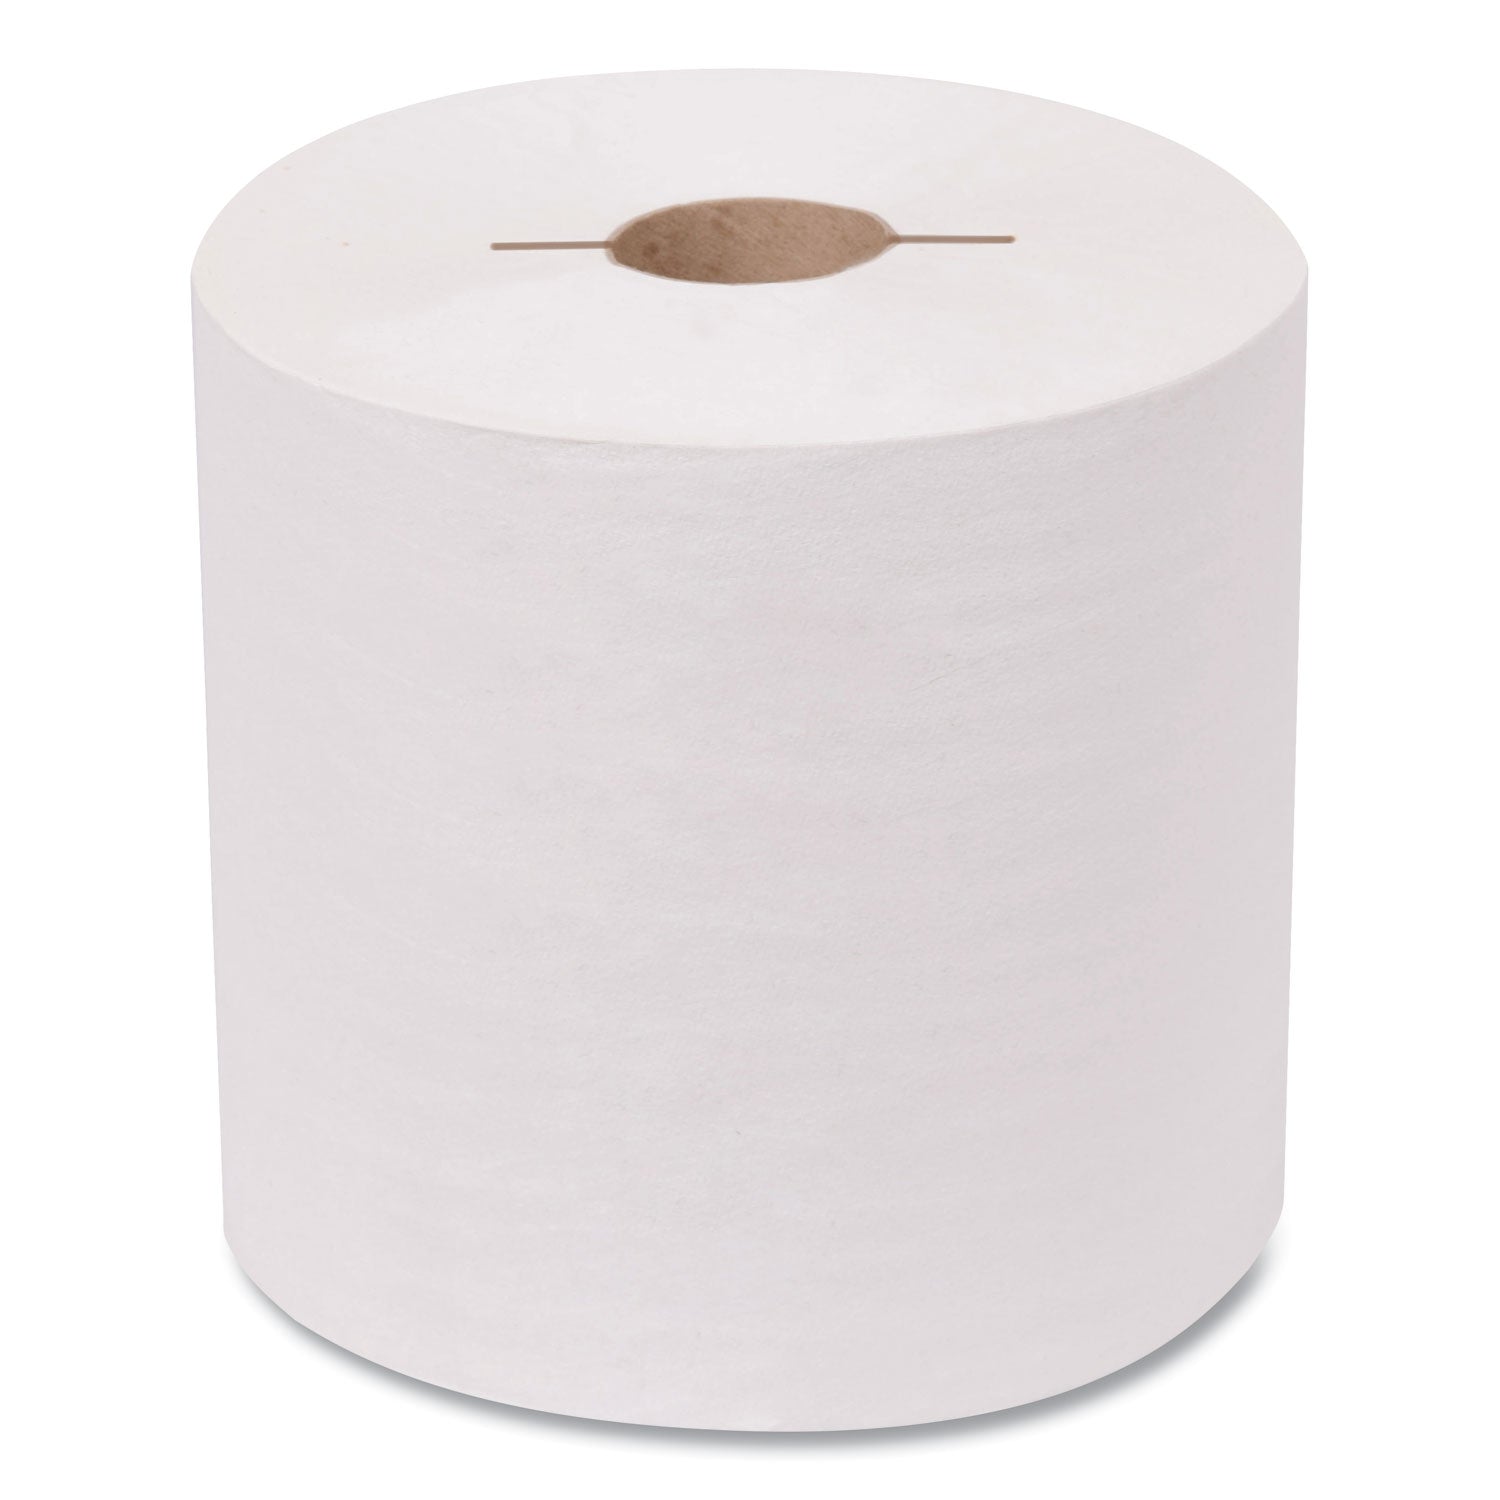 advanced-hand-towel-roll-notched-1-ply-75-x-10-960-roll-6-roll-carton_trk7178050 - 1